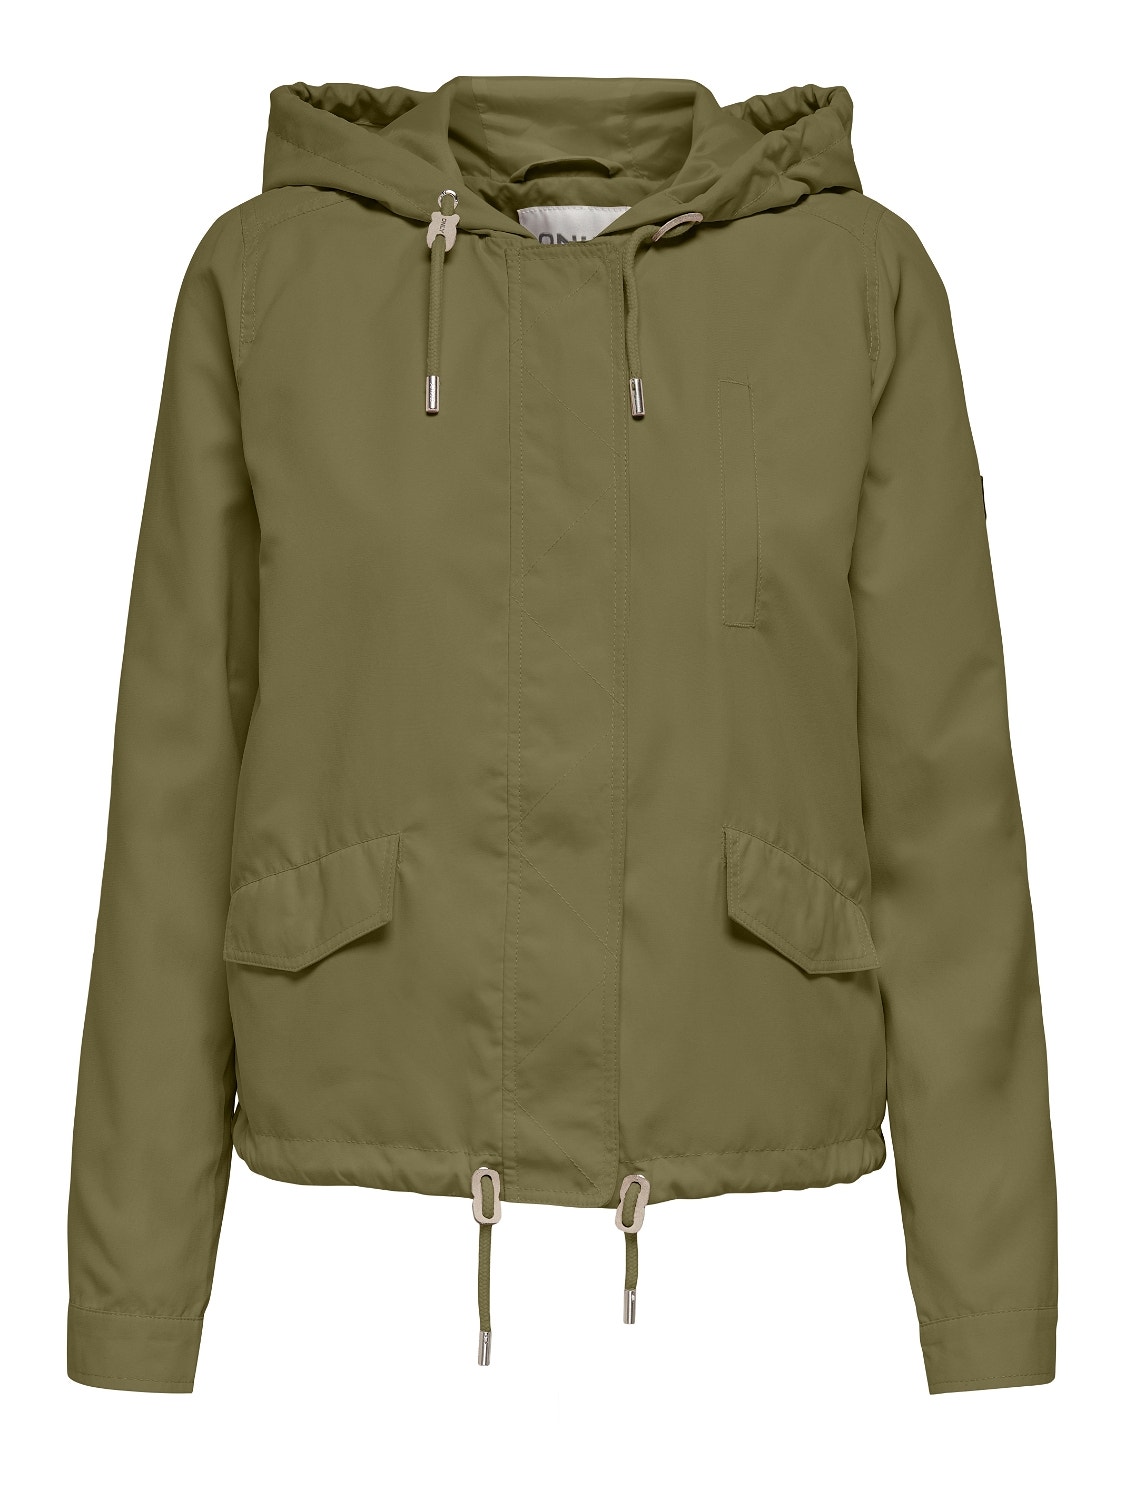 ONLY Jacket -Olive Drab - 15228627